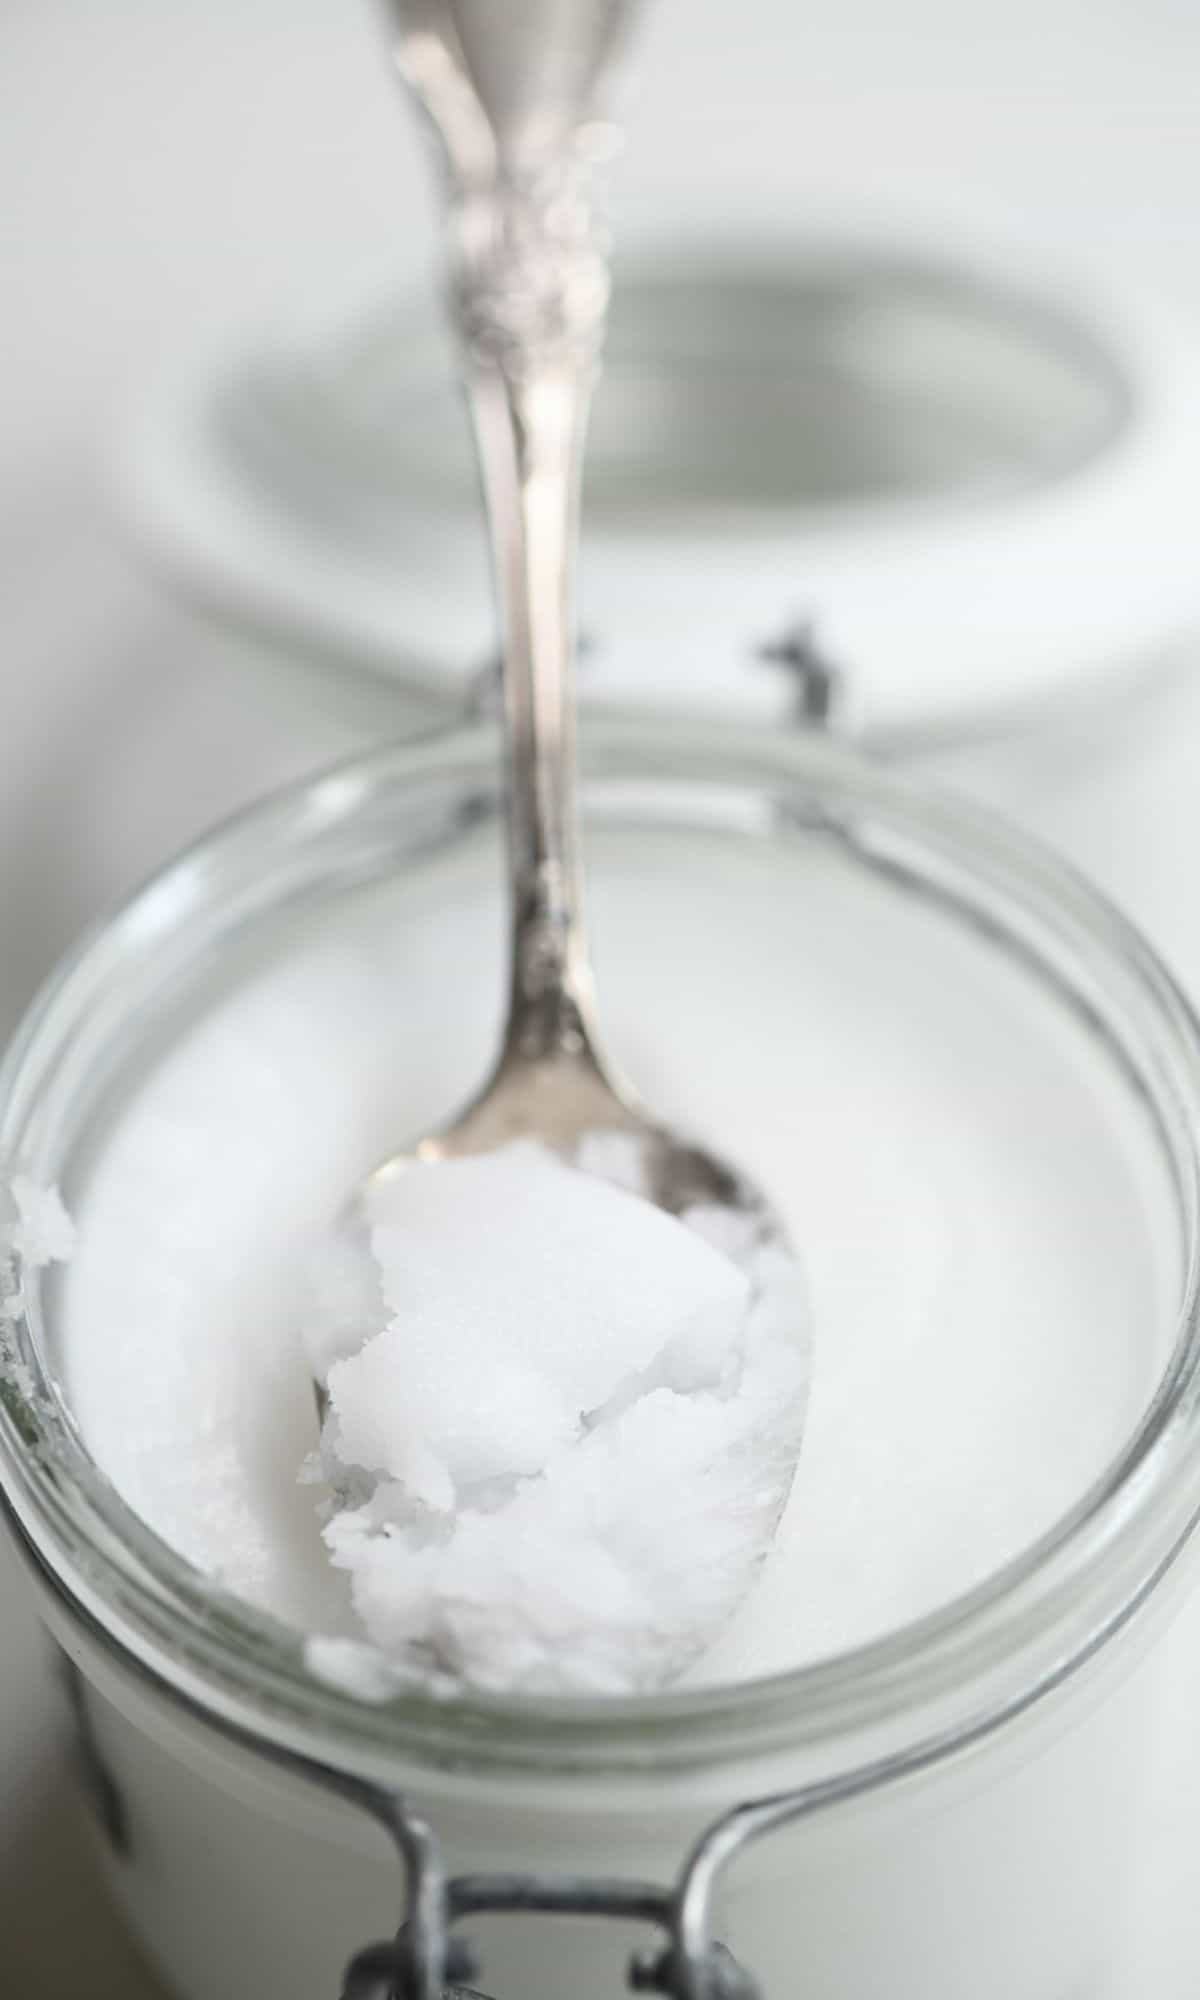 A spoonful of Extra virgin coconut oil resting on a jar